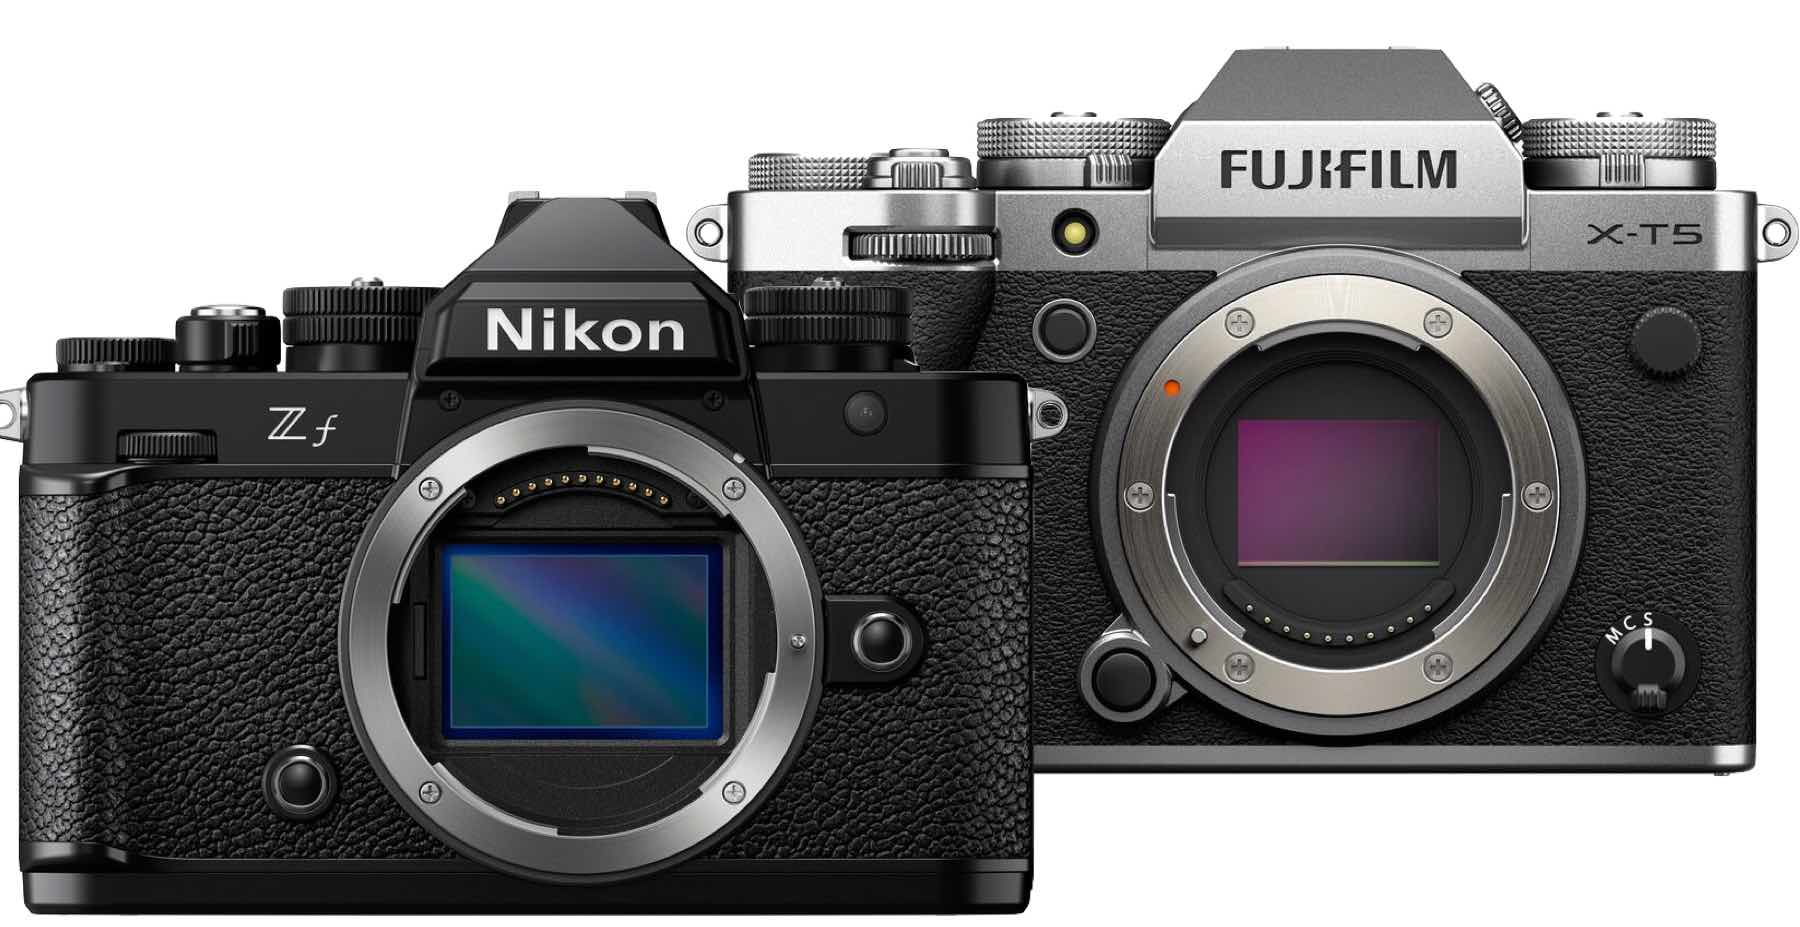 The Game-Changer for Hybrid Shooters: Fujifilm X-S20 Camera… - Moment